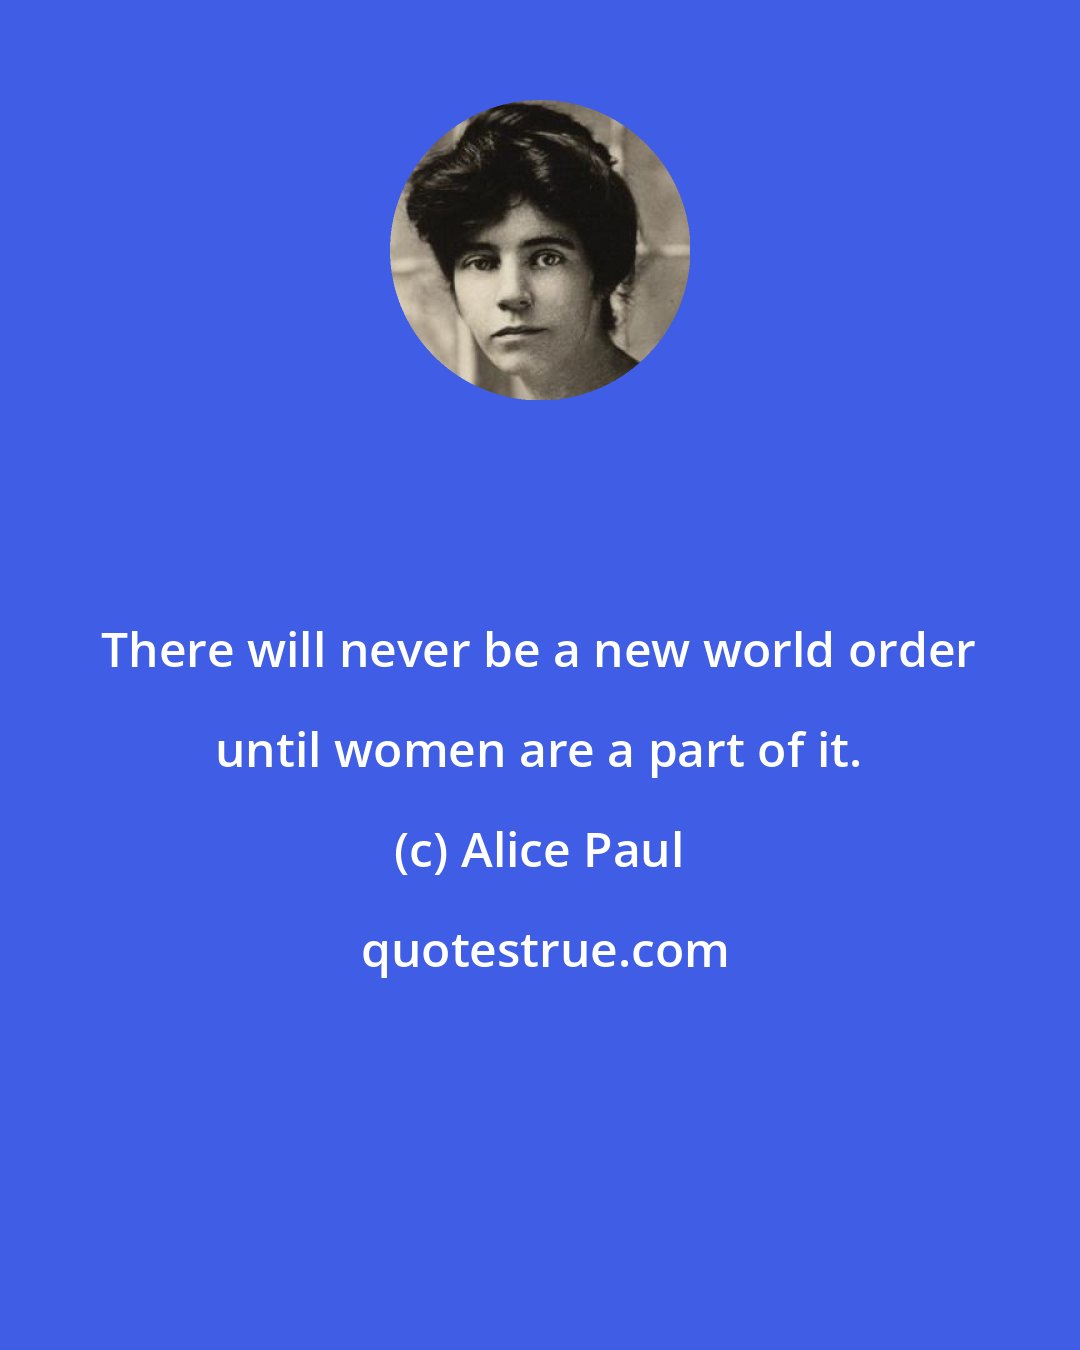 Alice Paul: There will never be a new world order until women are a part of it.